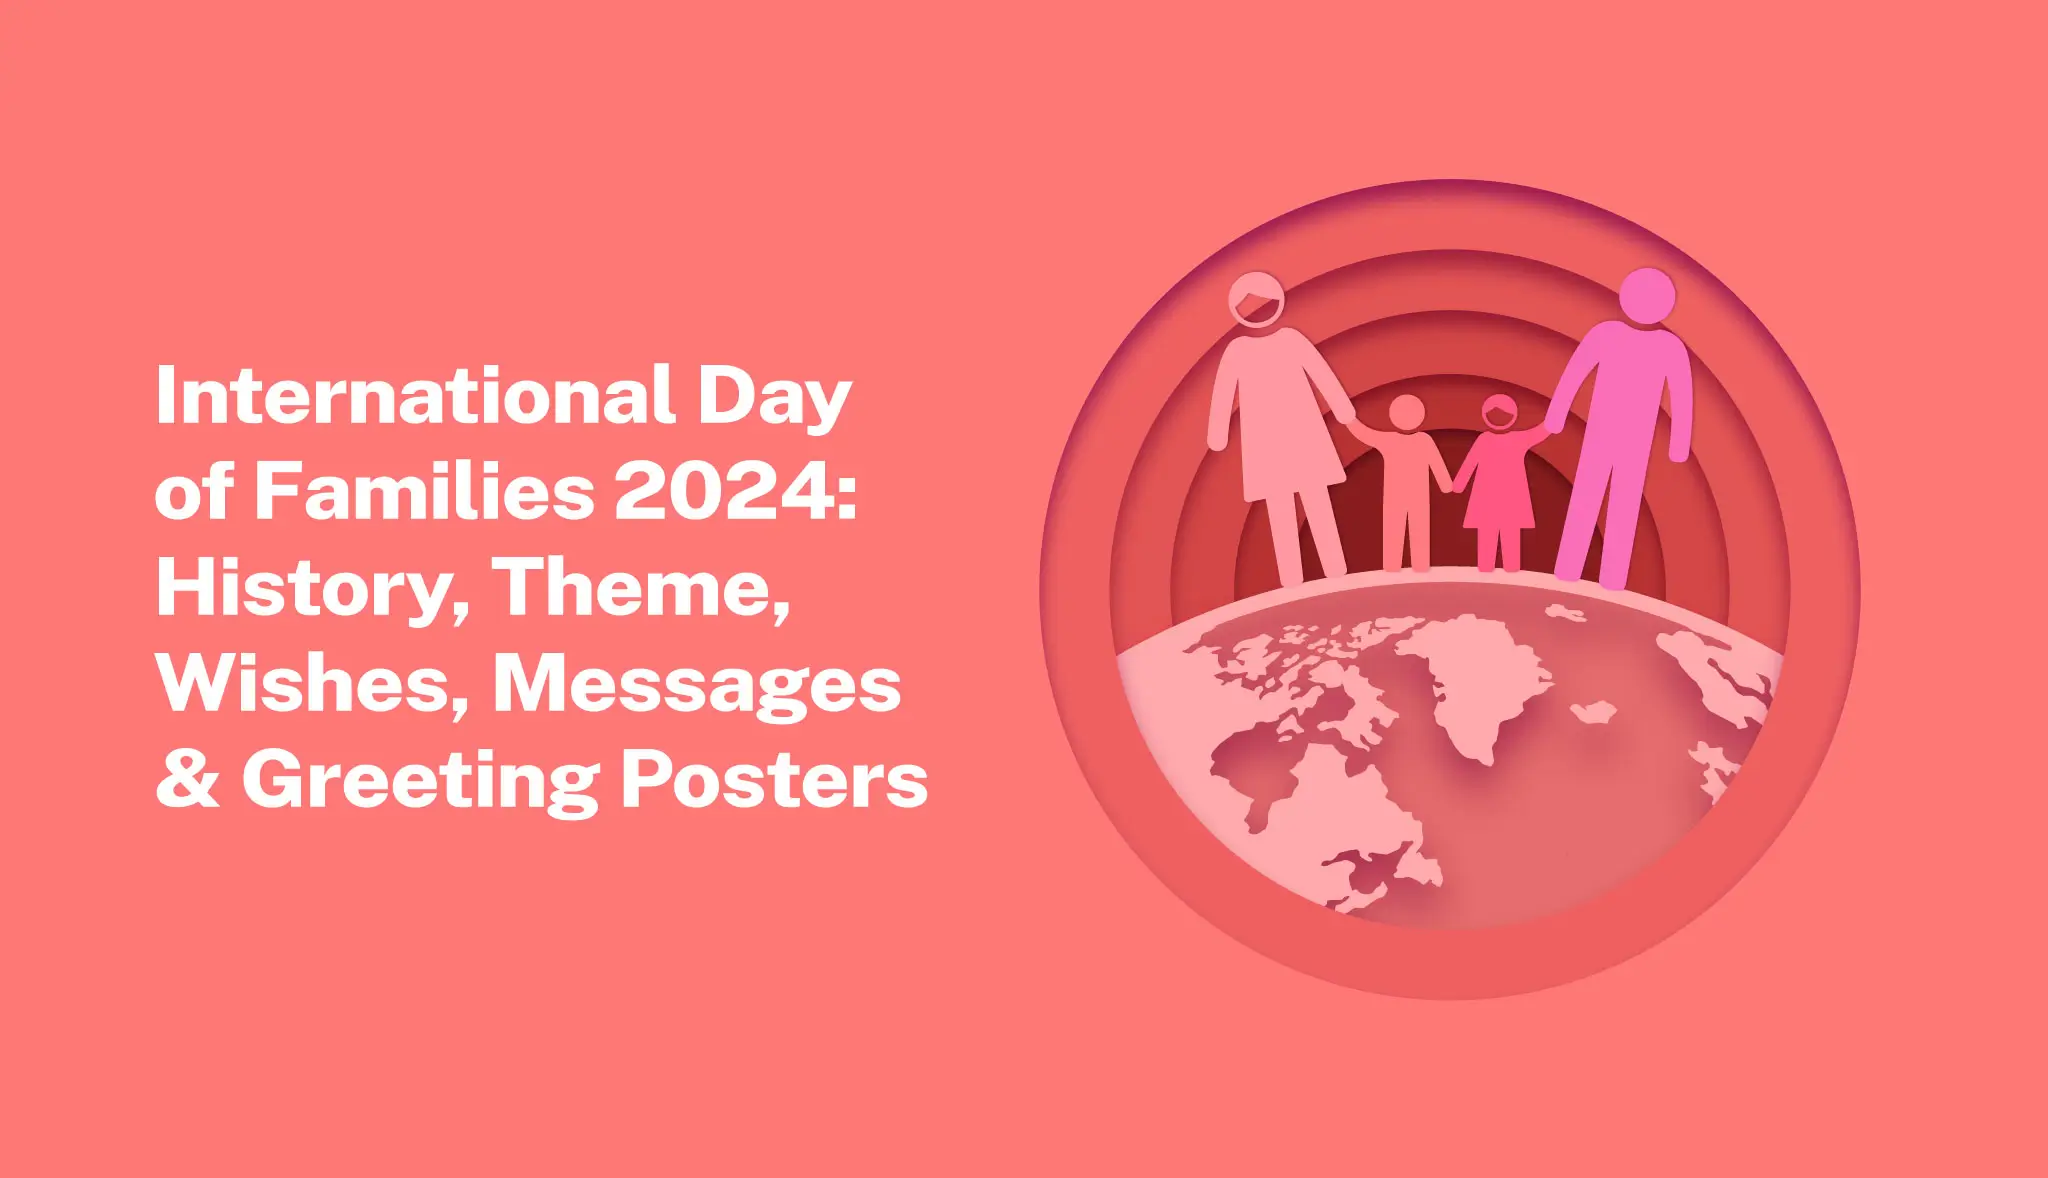 International Day of Families 2024: History, Theme, Wishes, Messages & Greeting Posters